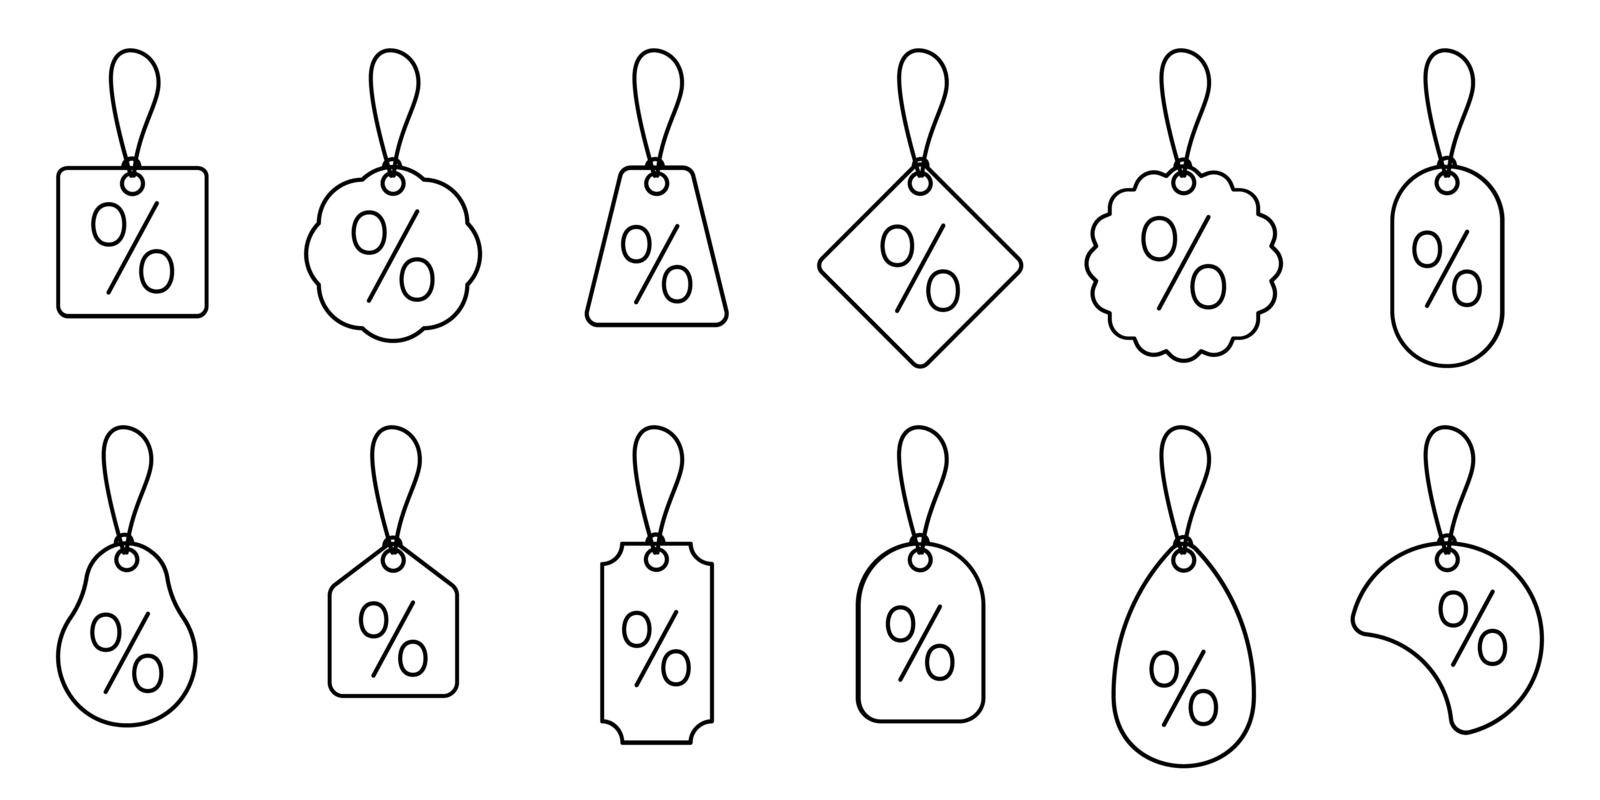 Discount offer tag icons. Set of linear shopping tag icons. Conceptual business icons. Vector illustration. Percentage icon.